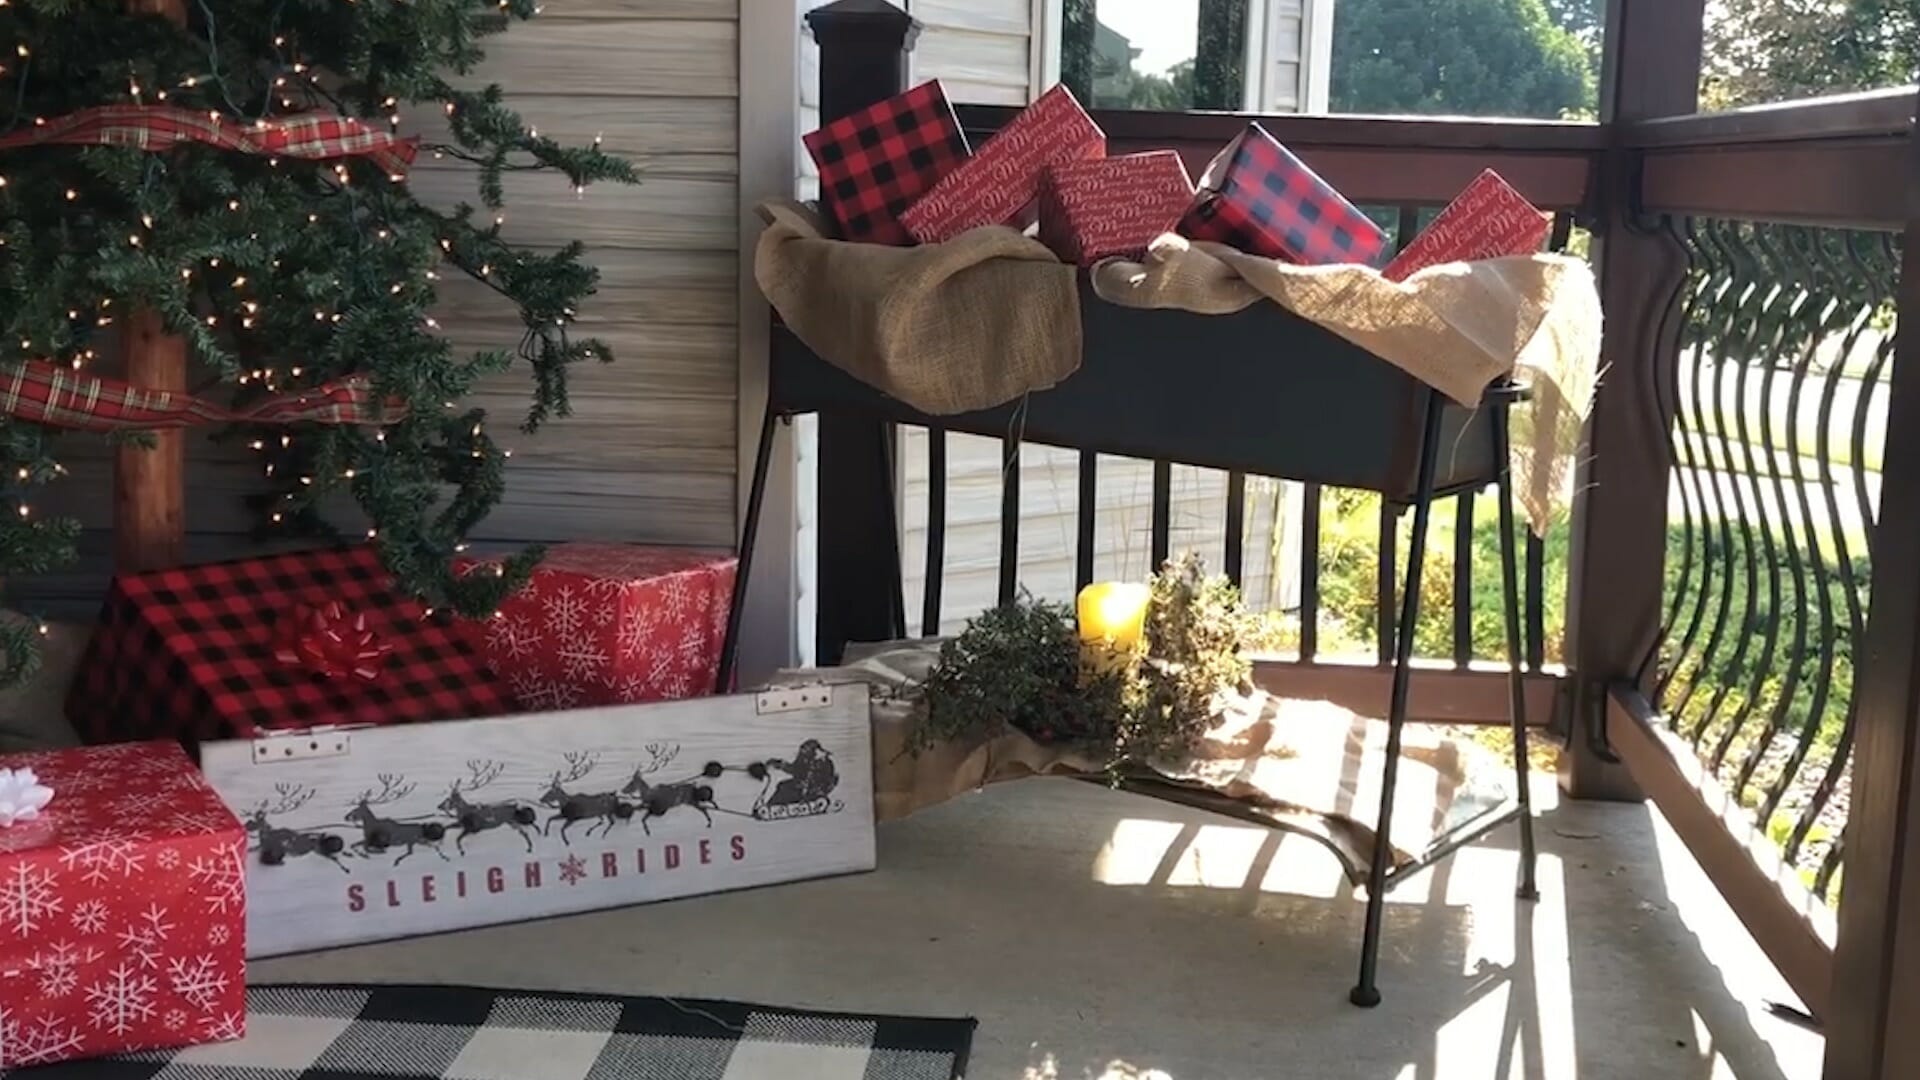 metal flower box filled with wrapped packages and burlap, wrapped gifts under a lit tree on front porch